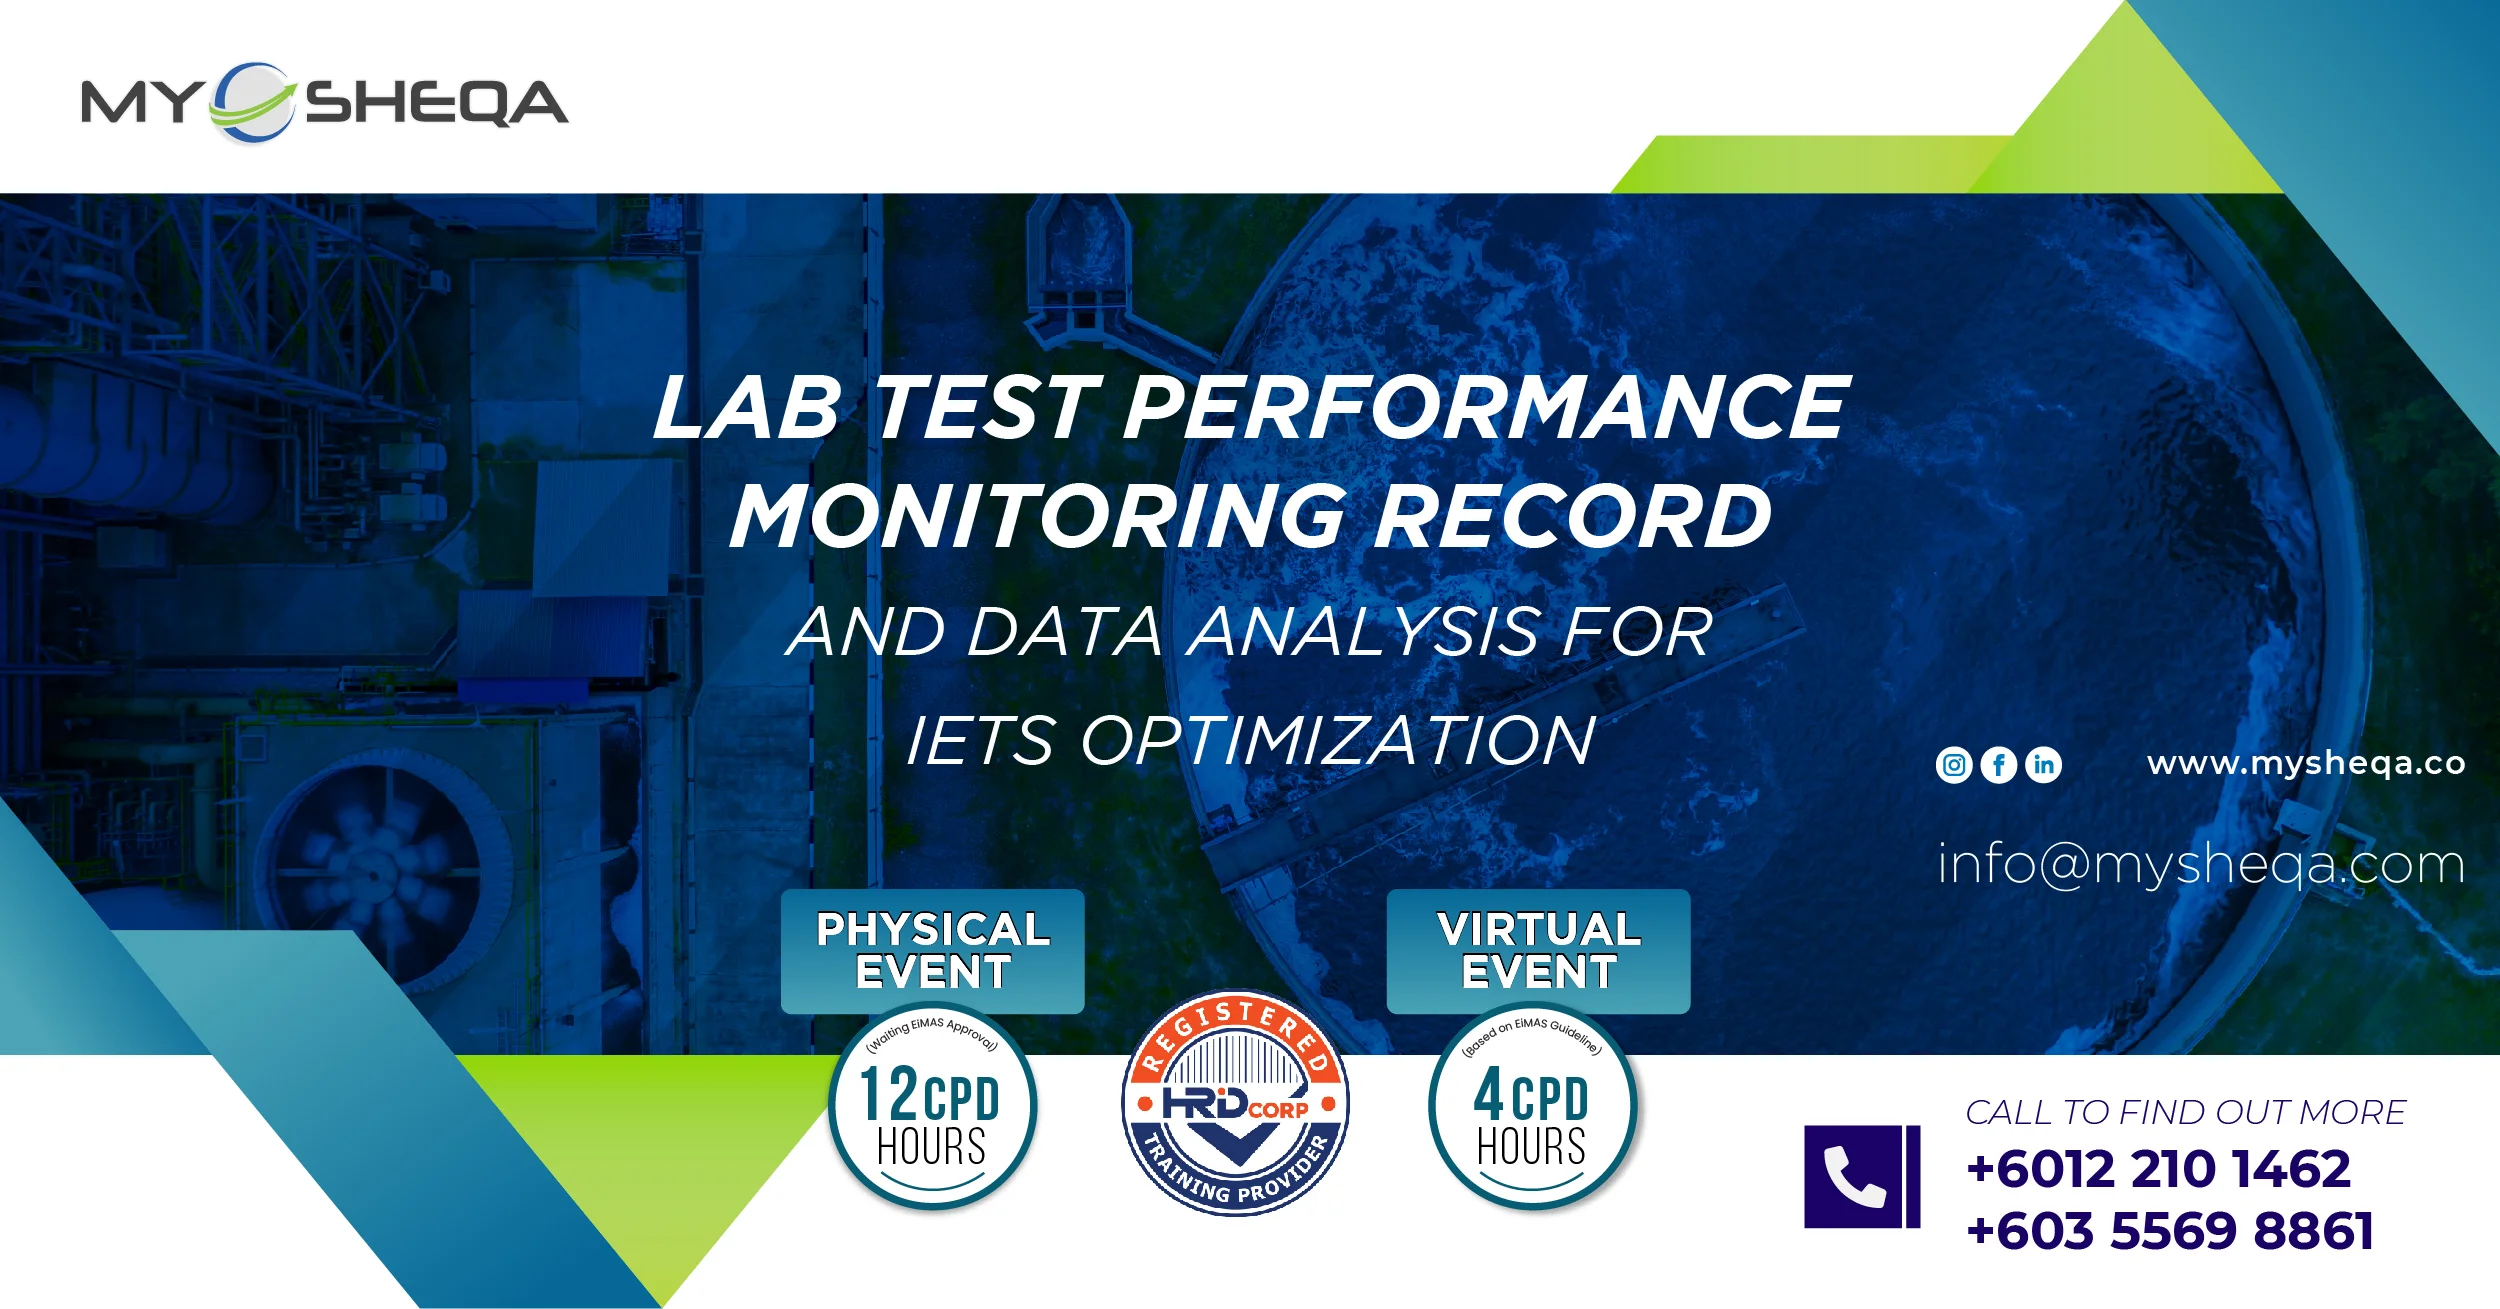 Lab Test Performance Monitoring Record And Data Analysis For IETS Optimization